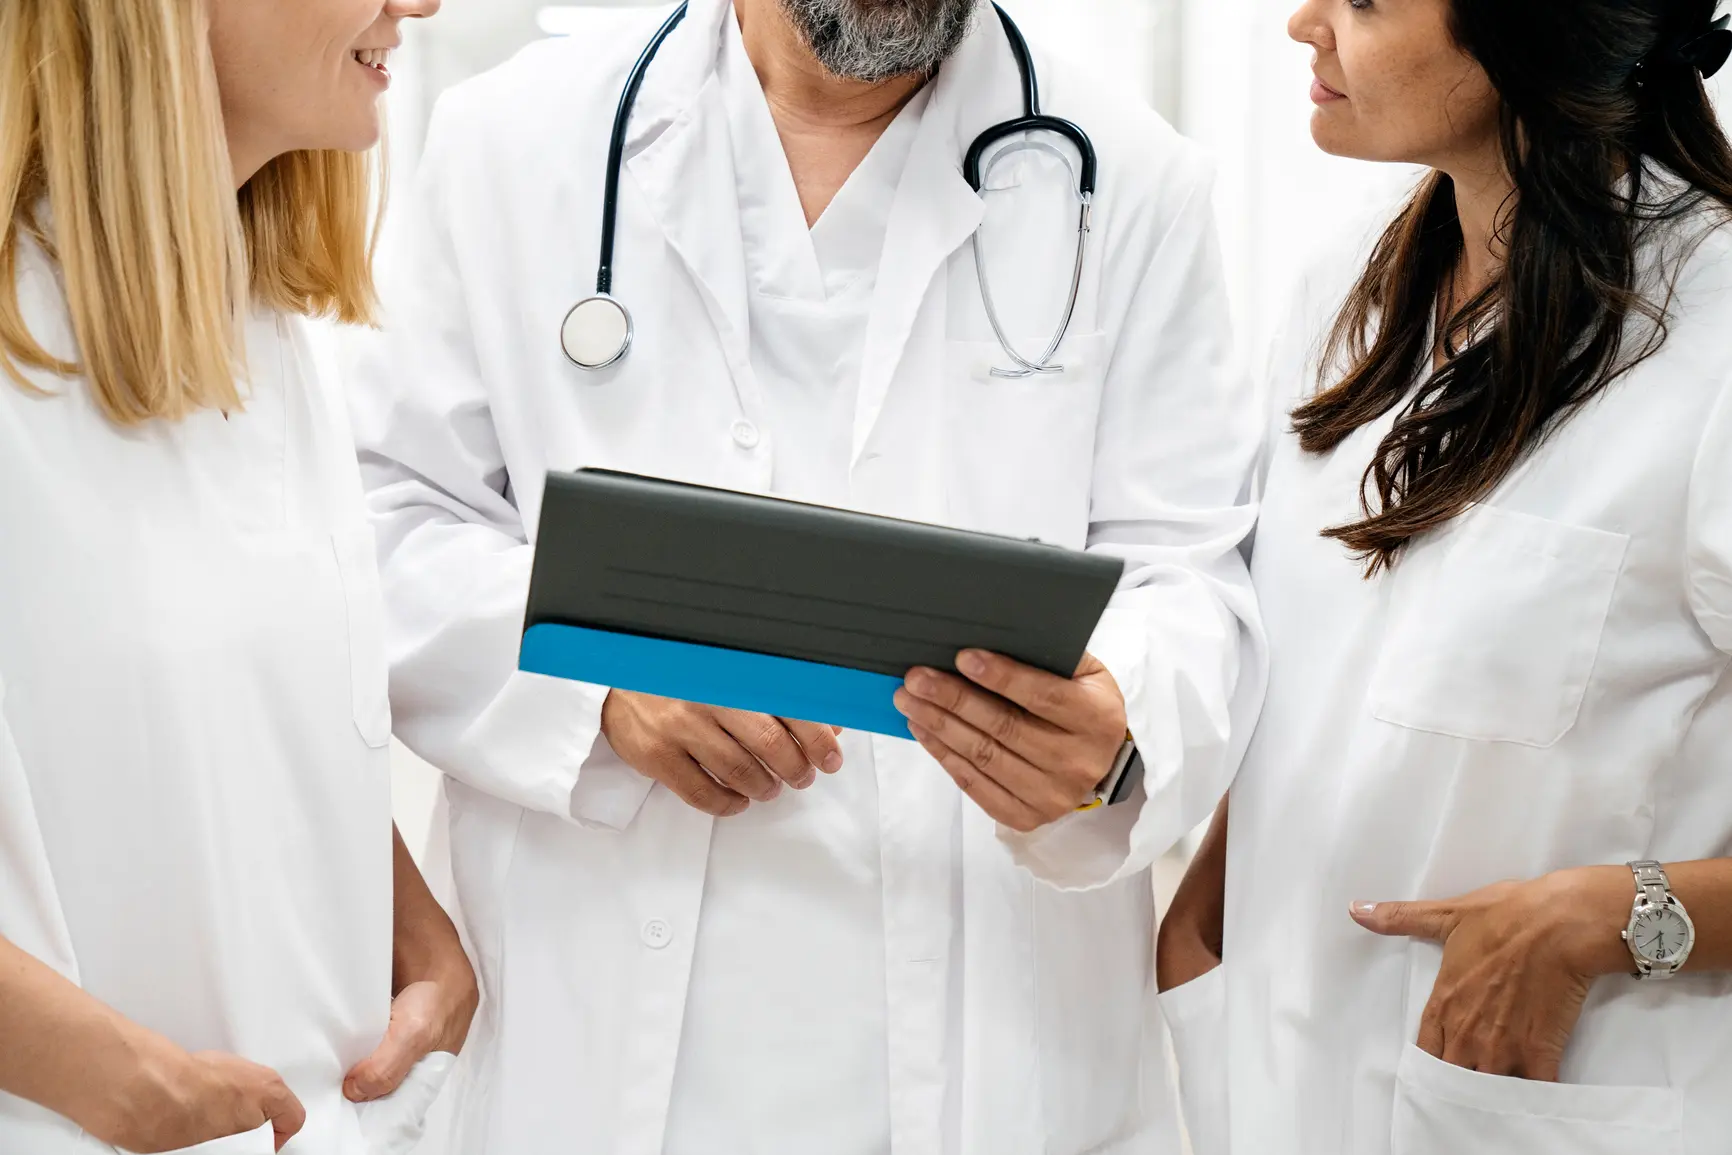 Three physicians review a patient's treatment history on a tablet.